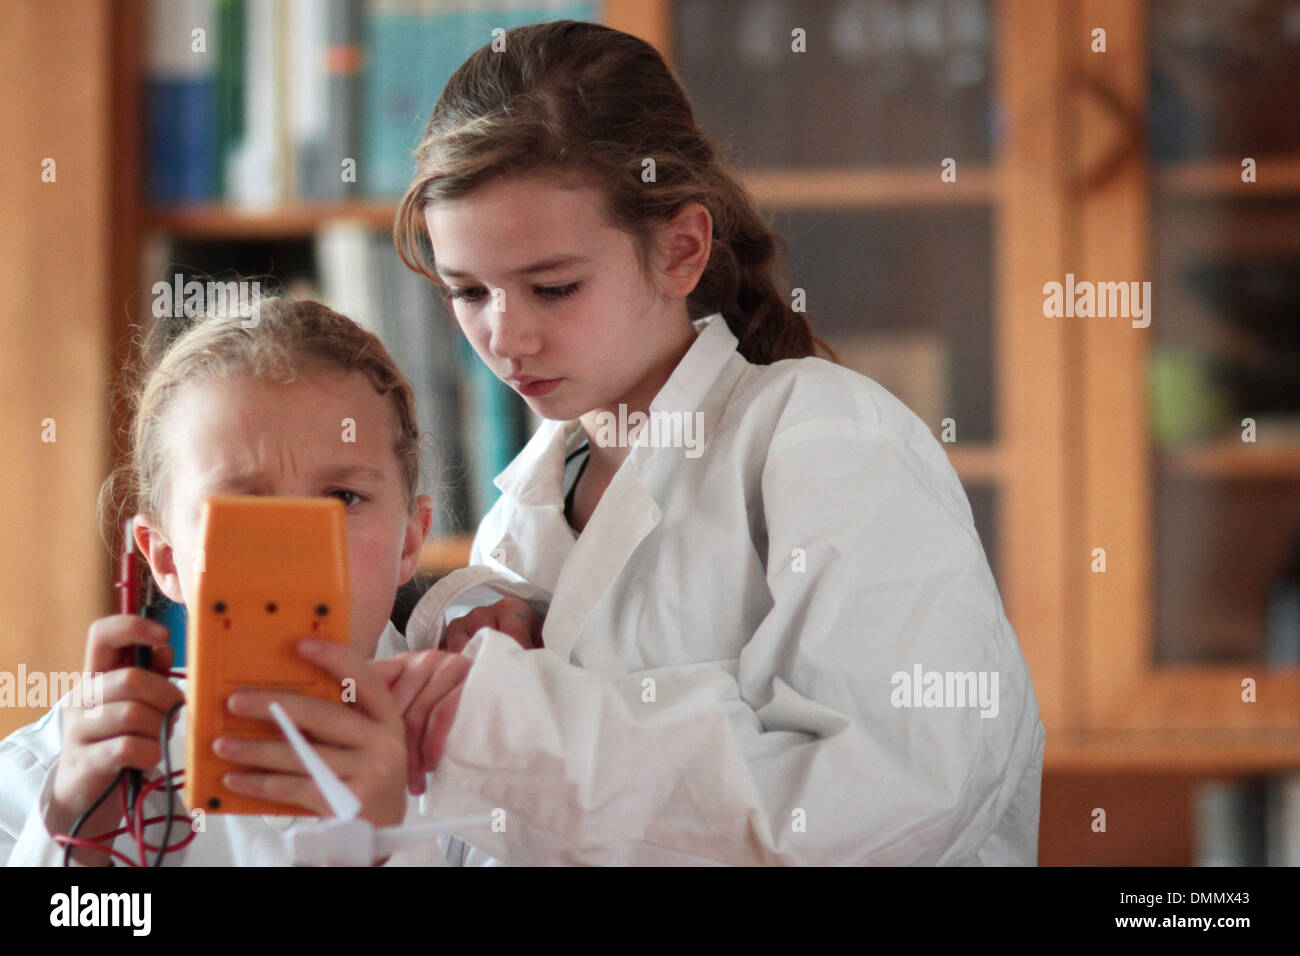 girls working with a electrical device with lab coat Stock Photo